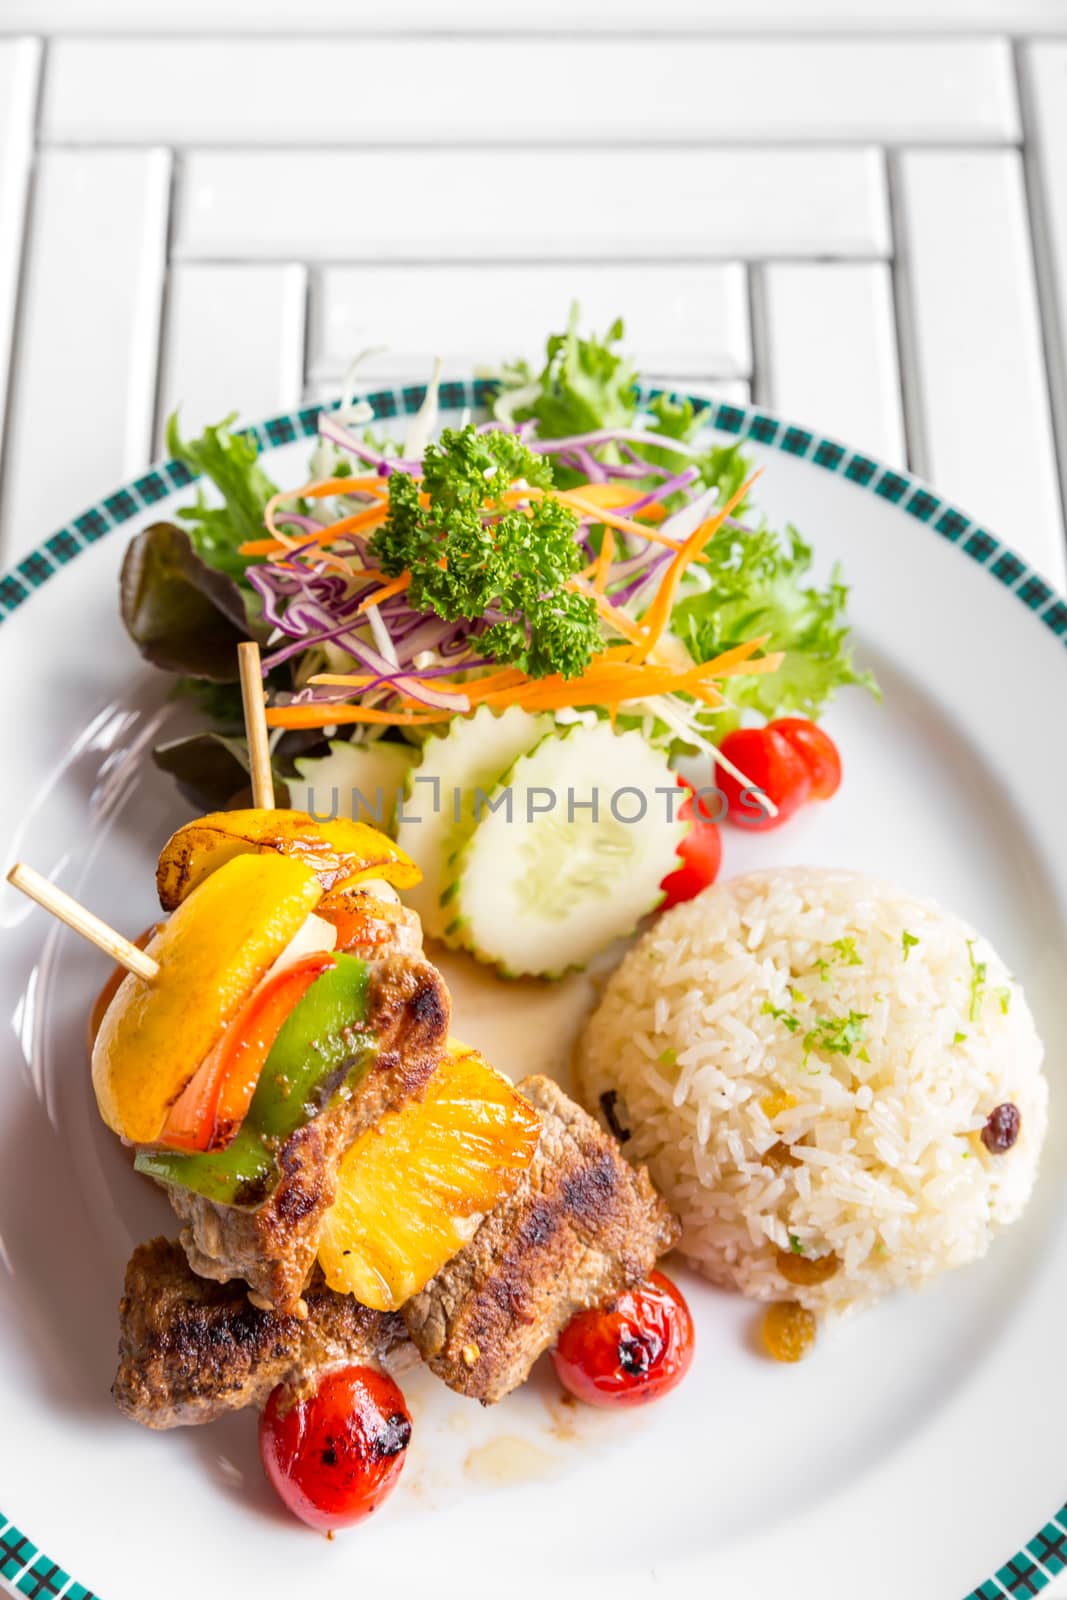 grilled beef skewer with fried rice